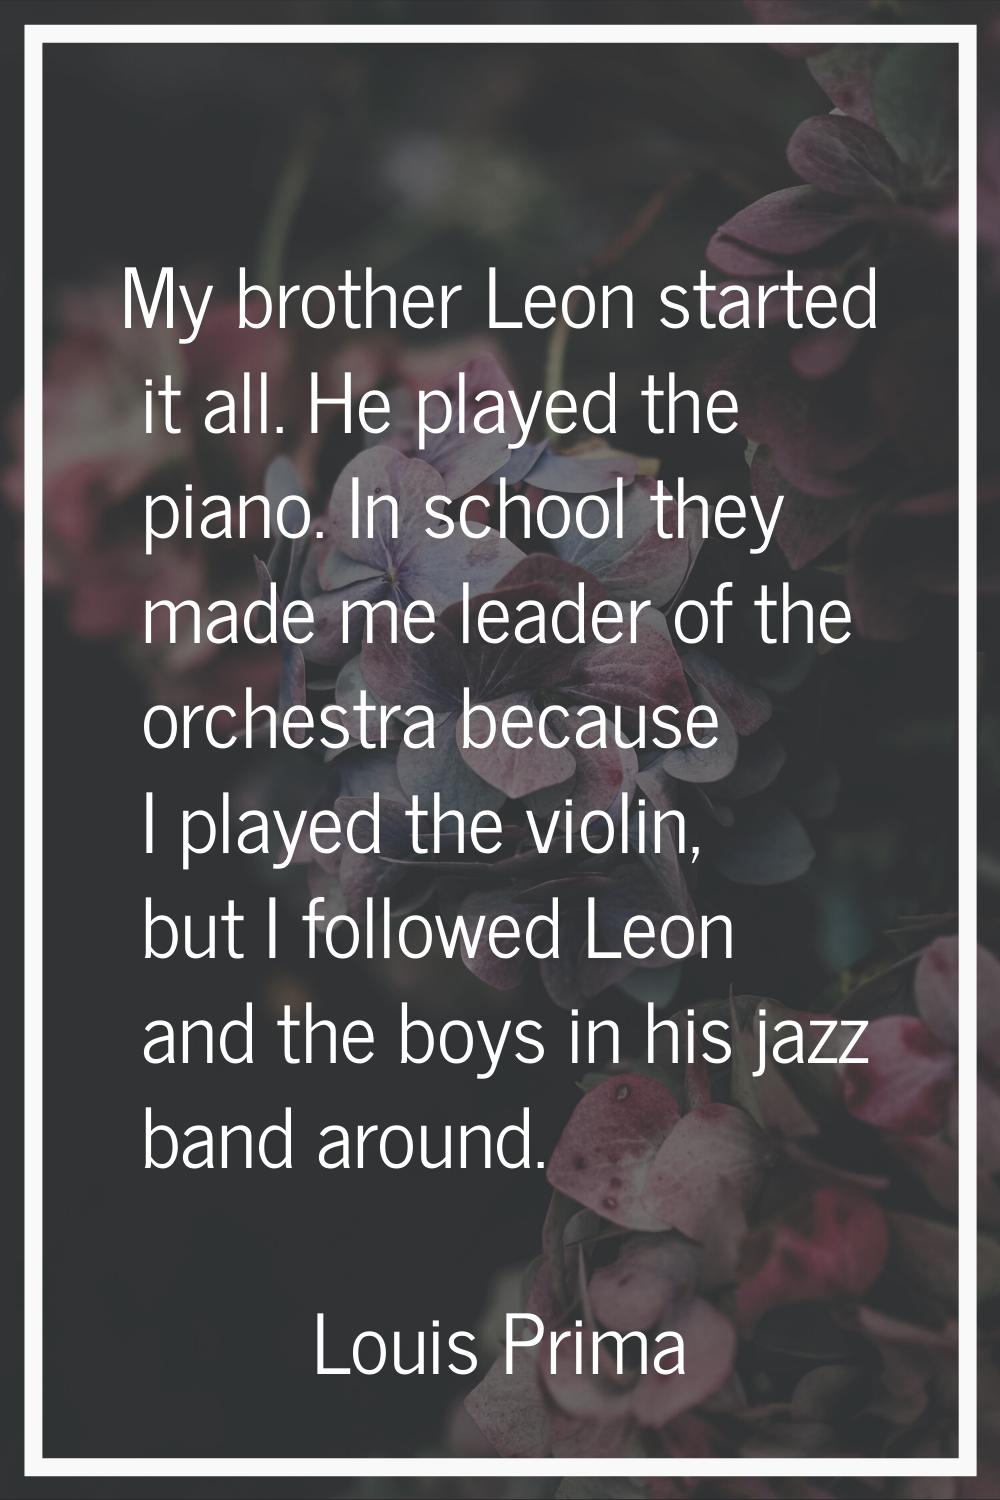 My brother Leon started it all. He played the piano. In school they made me leader of the orchestra